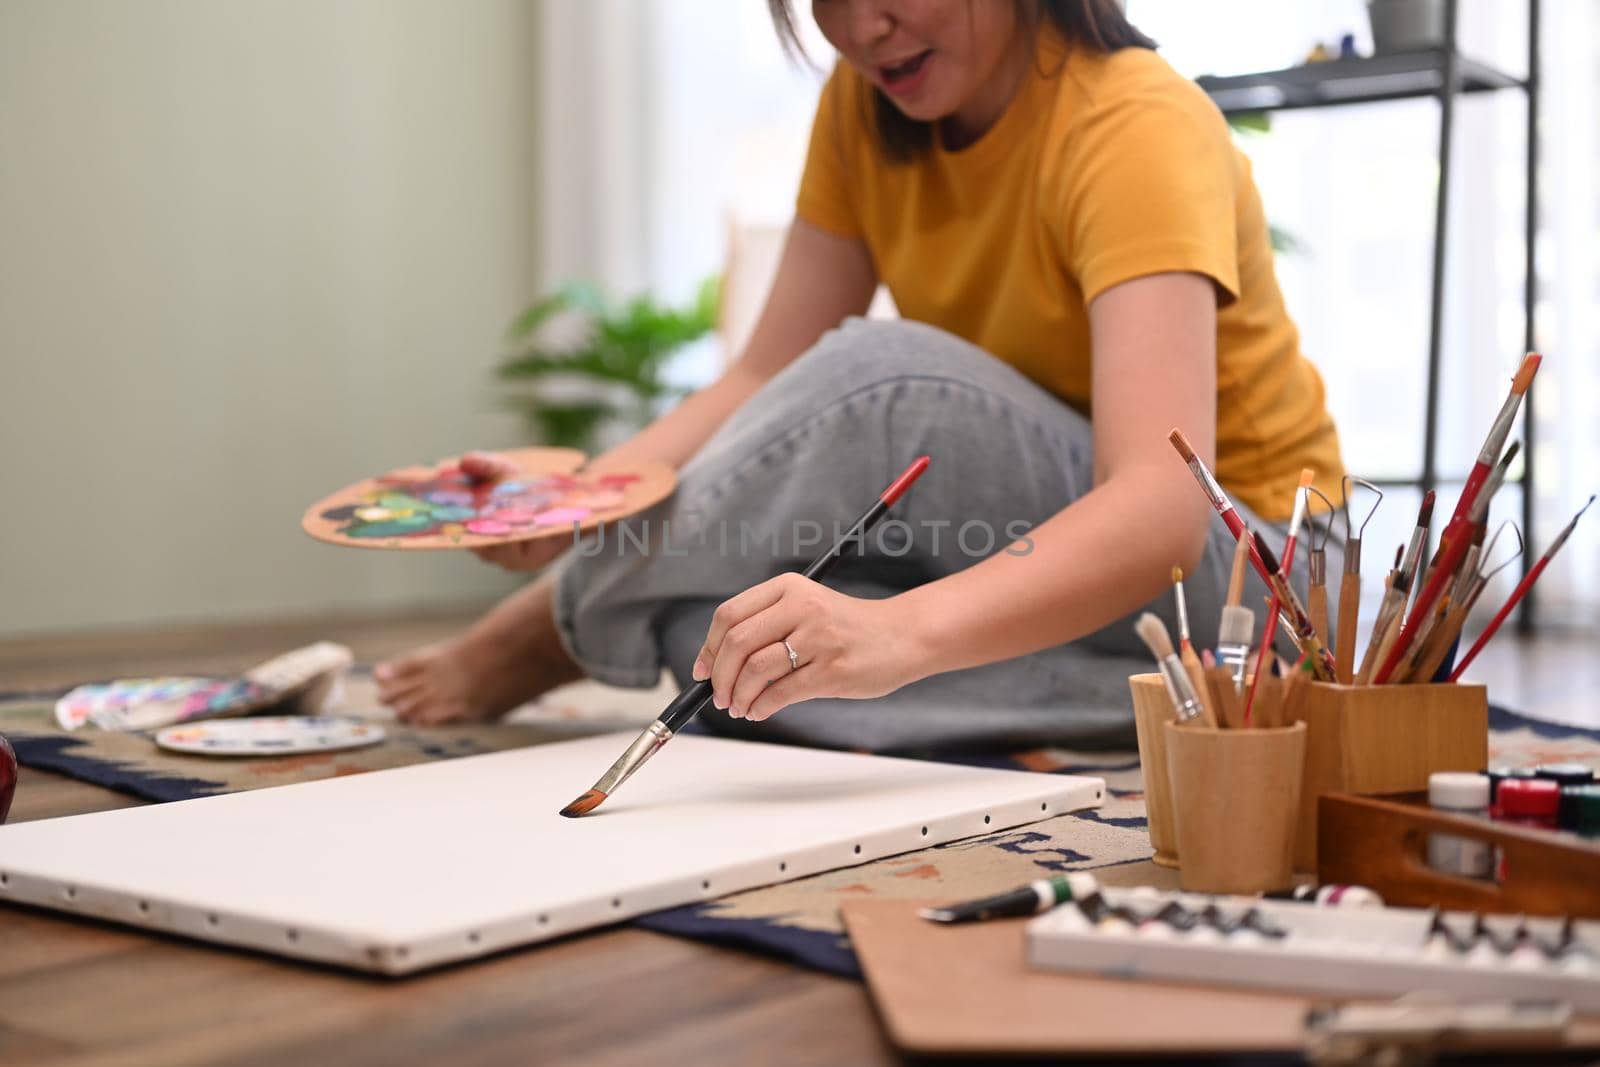 Casual young woman painting art picture with watercolor on canvas, enjoy creativity activity at home. Art, hobby and leisure activity concept by prathanchorruangsak